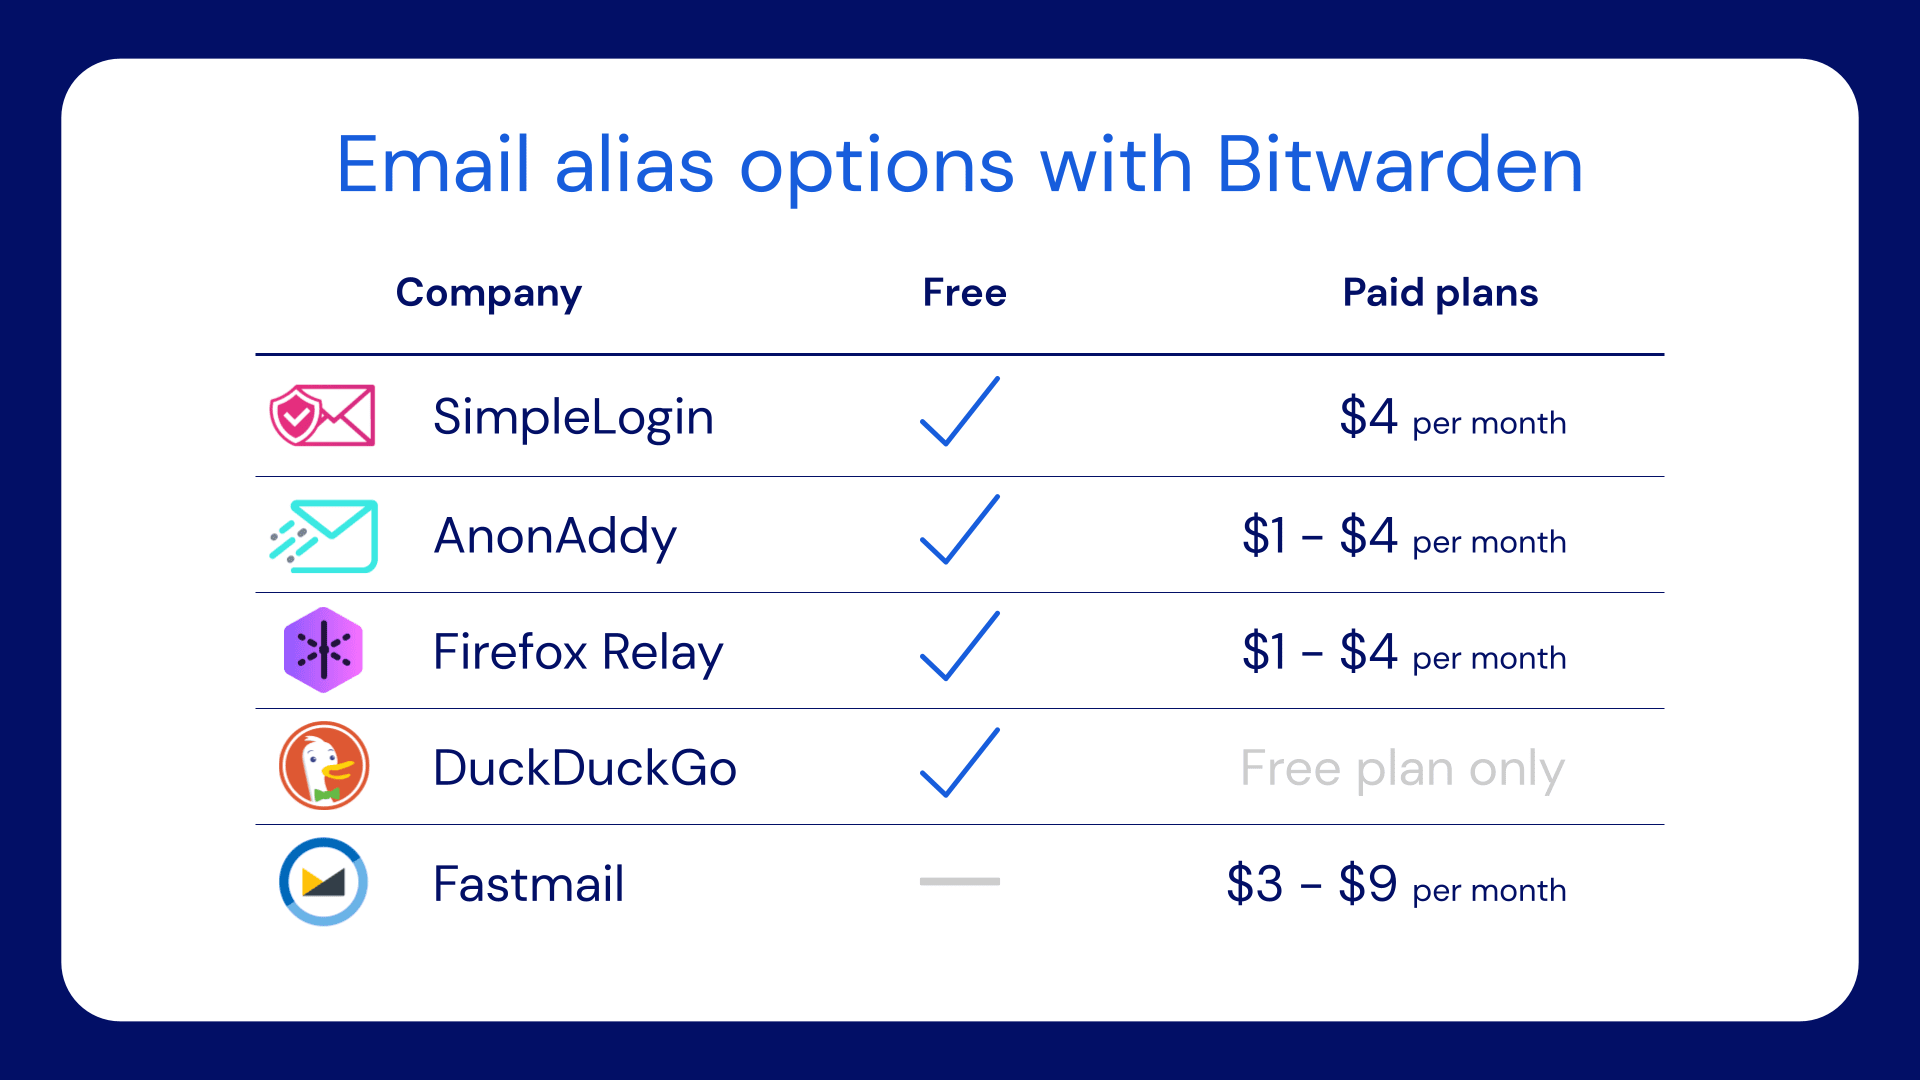 Email alias options with Bitwarden